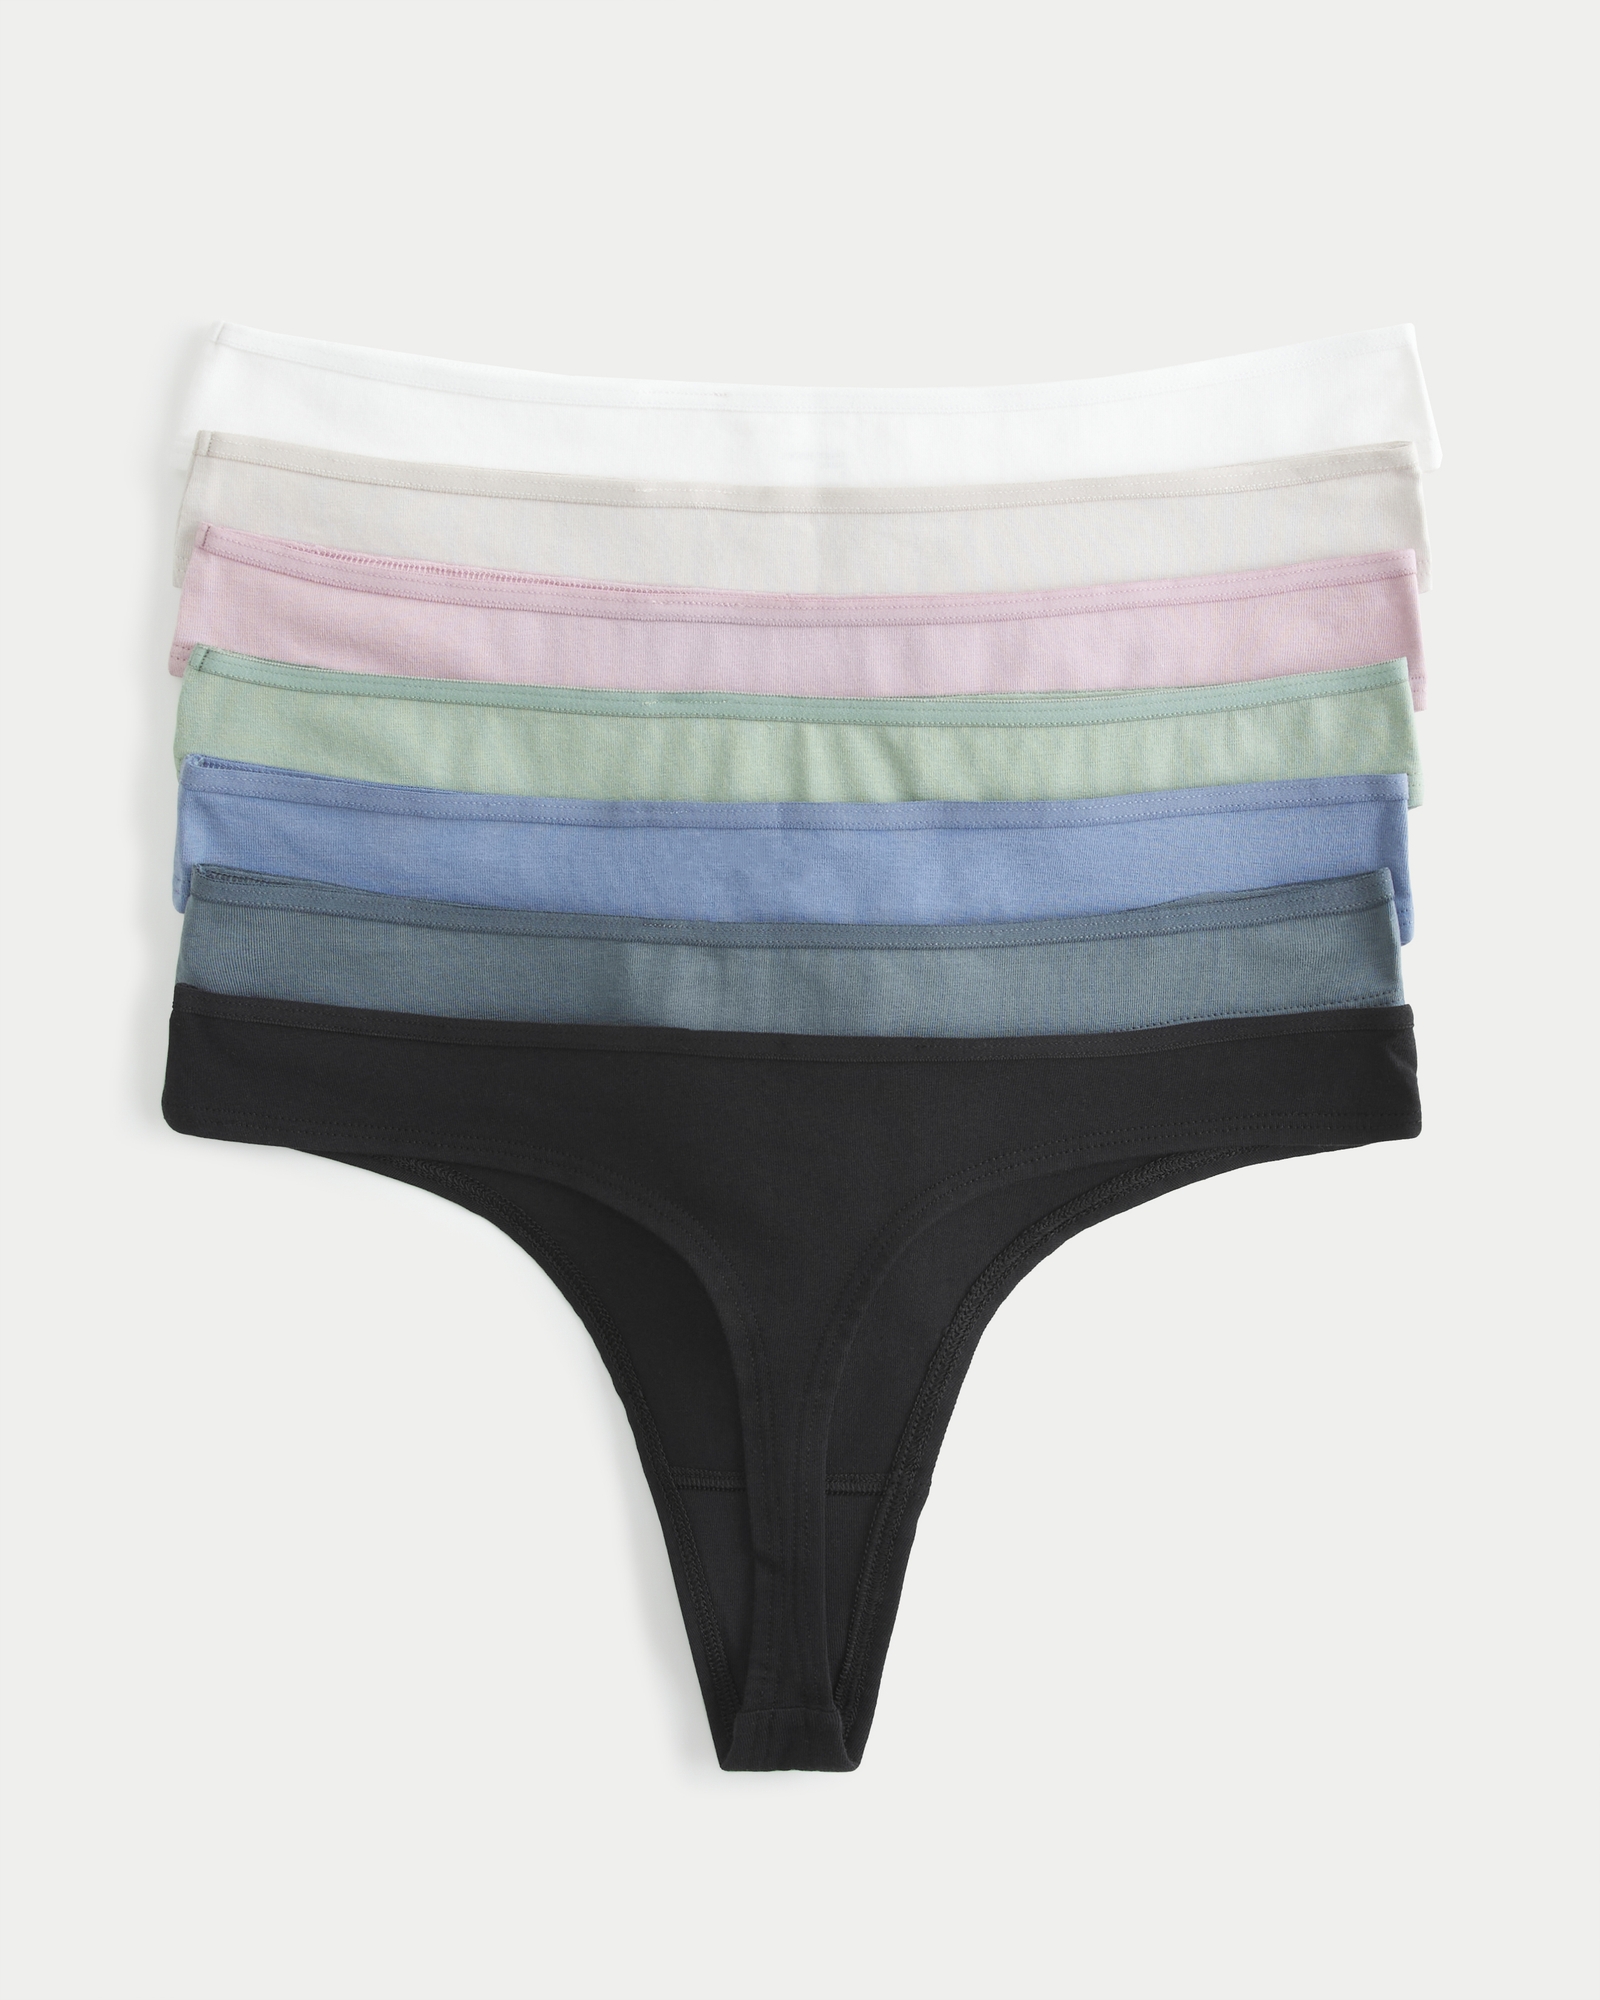 Gilly Hicks Gh Male Underwear - Boxers 